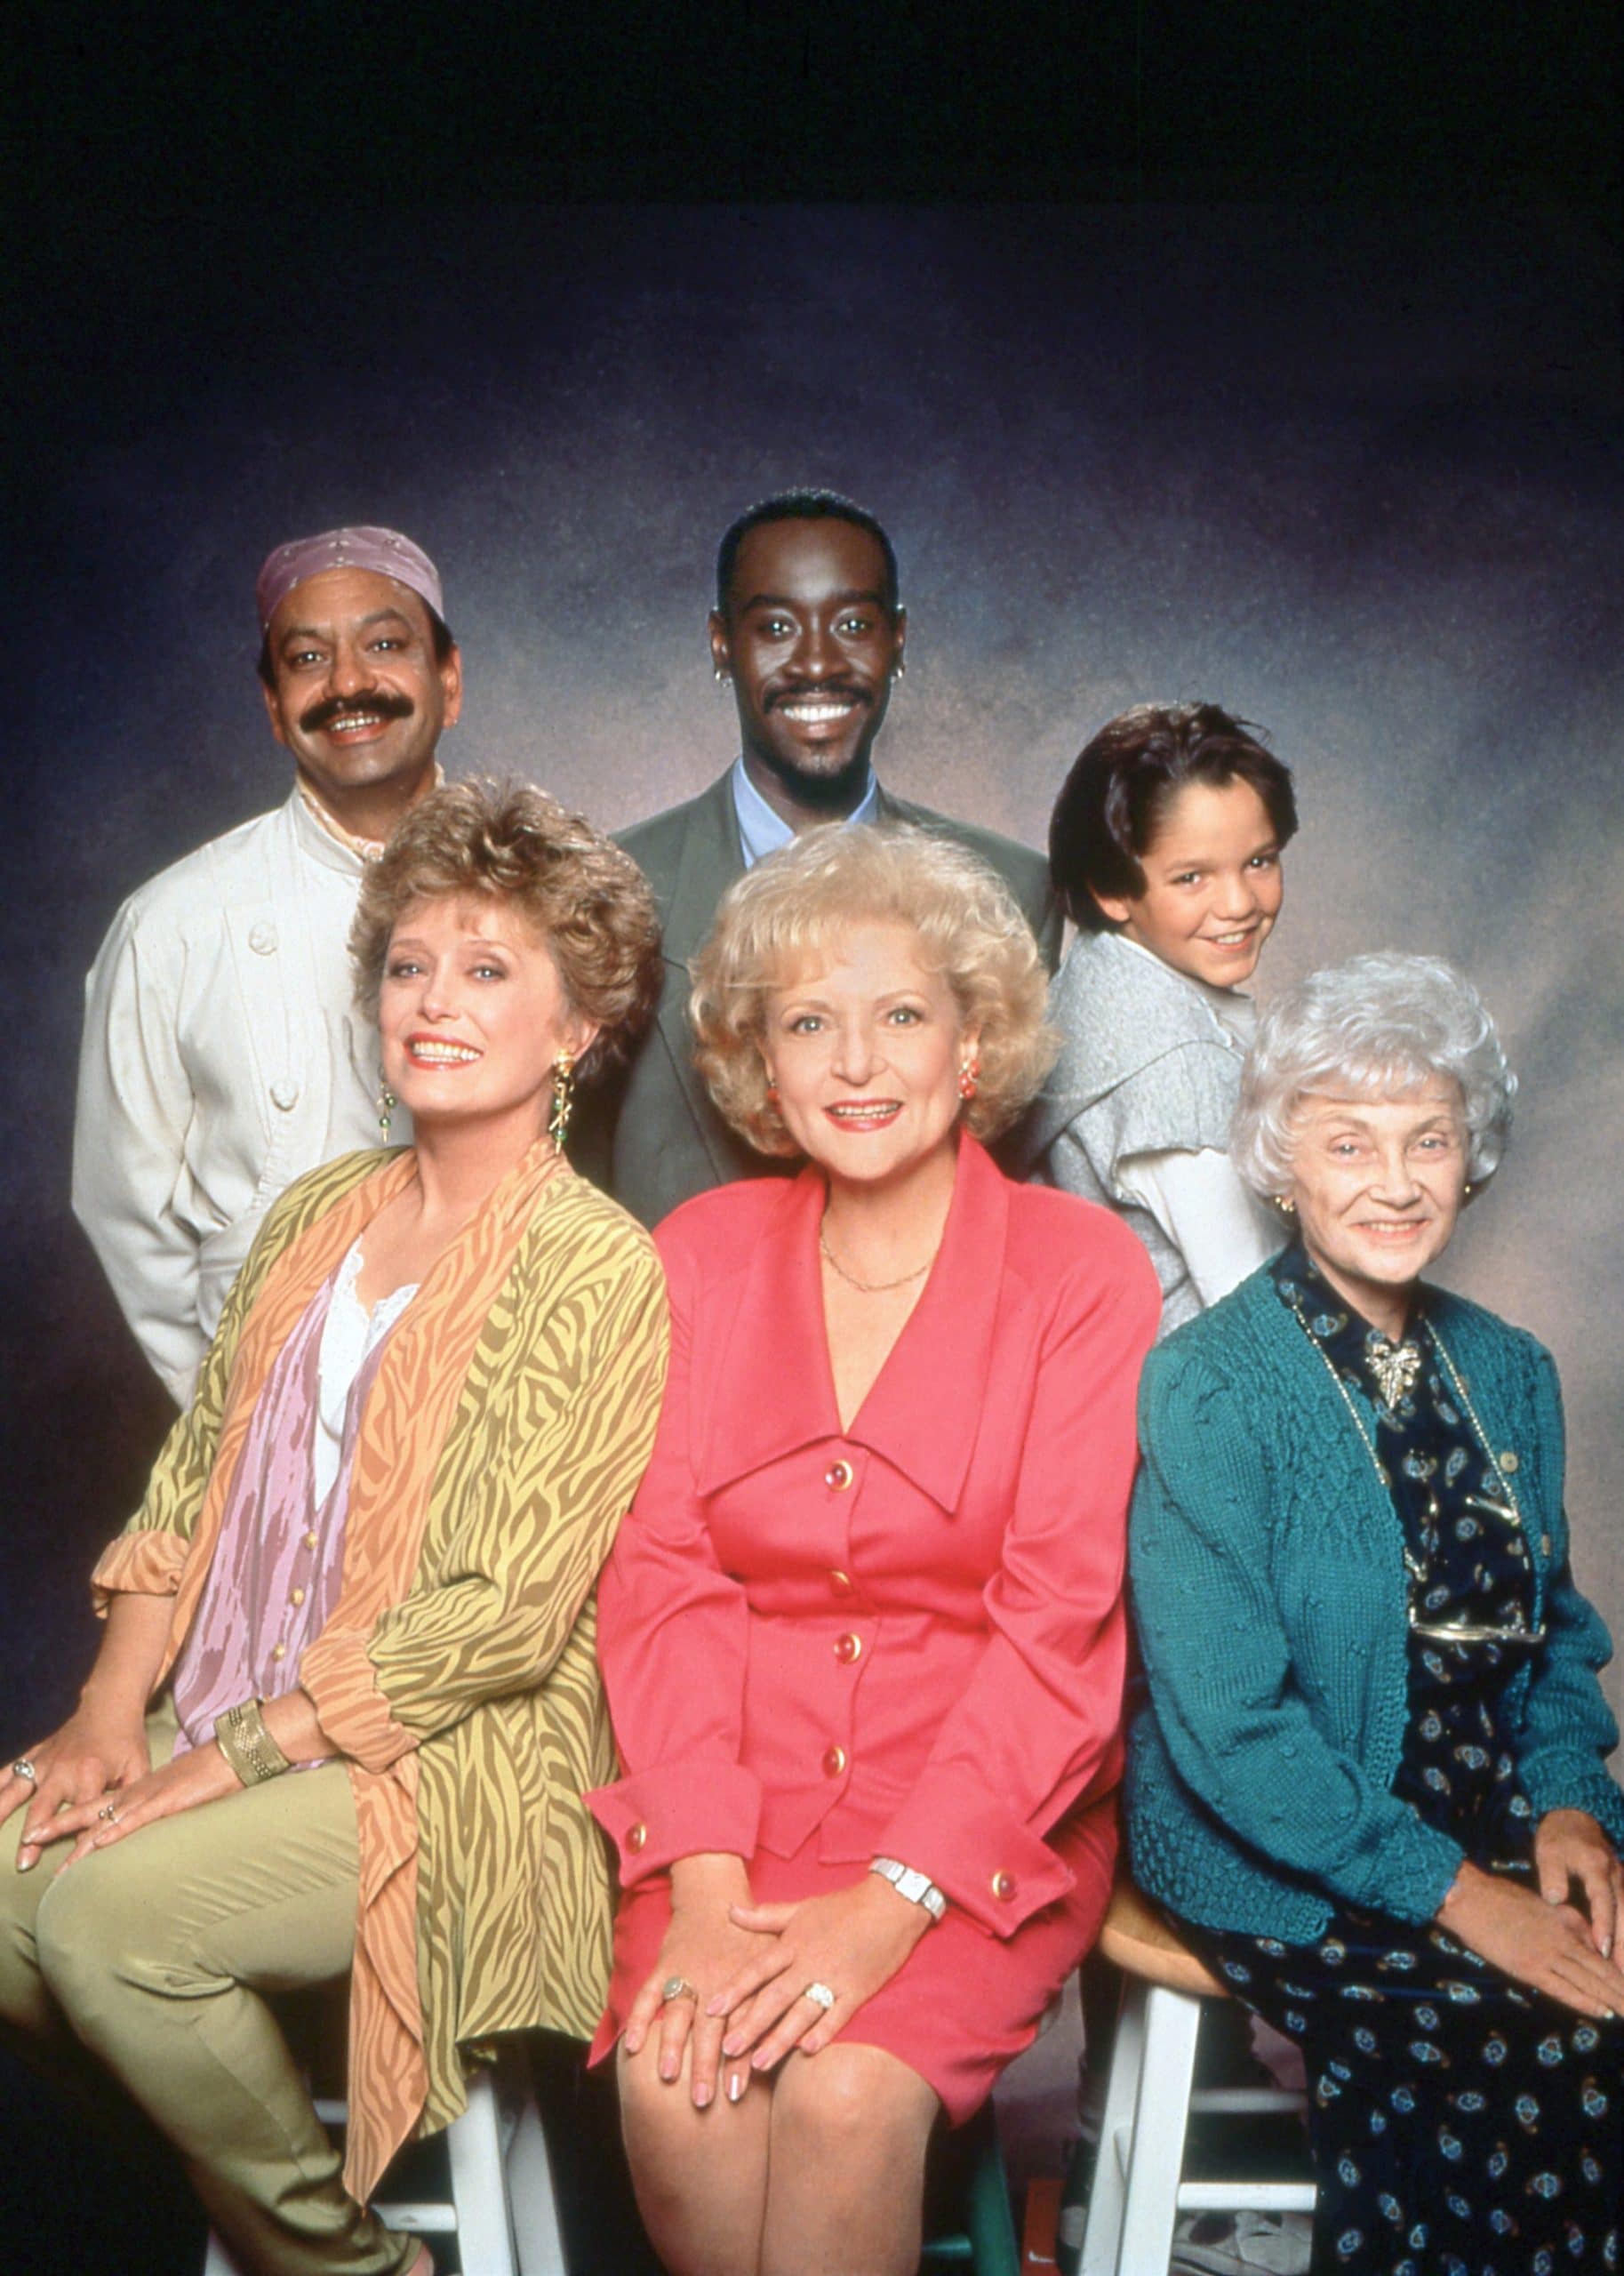 THE GOLDEN PALACE, top from left: Cheech Marin, Don Cheadle, Billy L. Sullivan, bottom: Rue McClanahan, Betty White, Estelle Getty